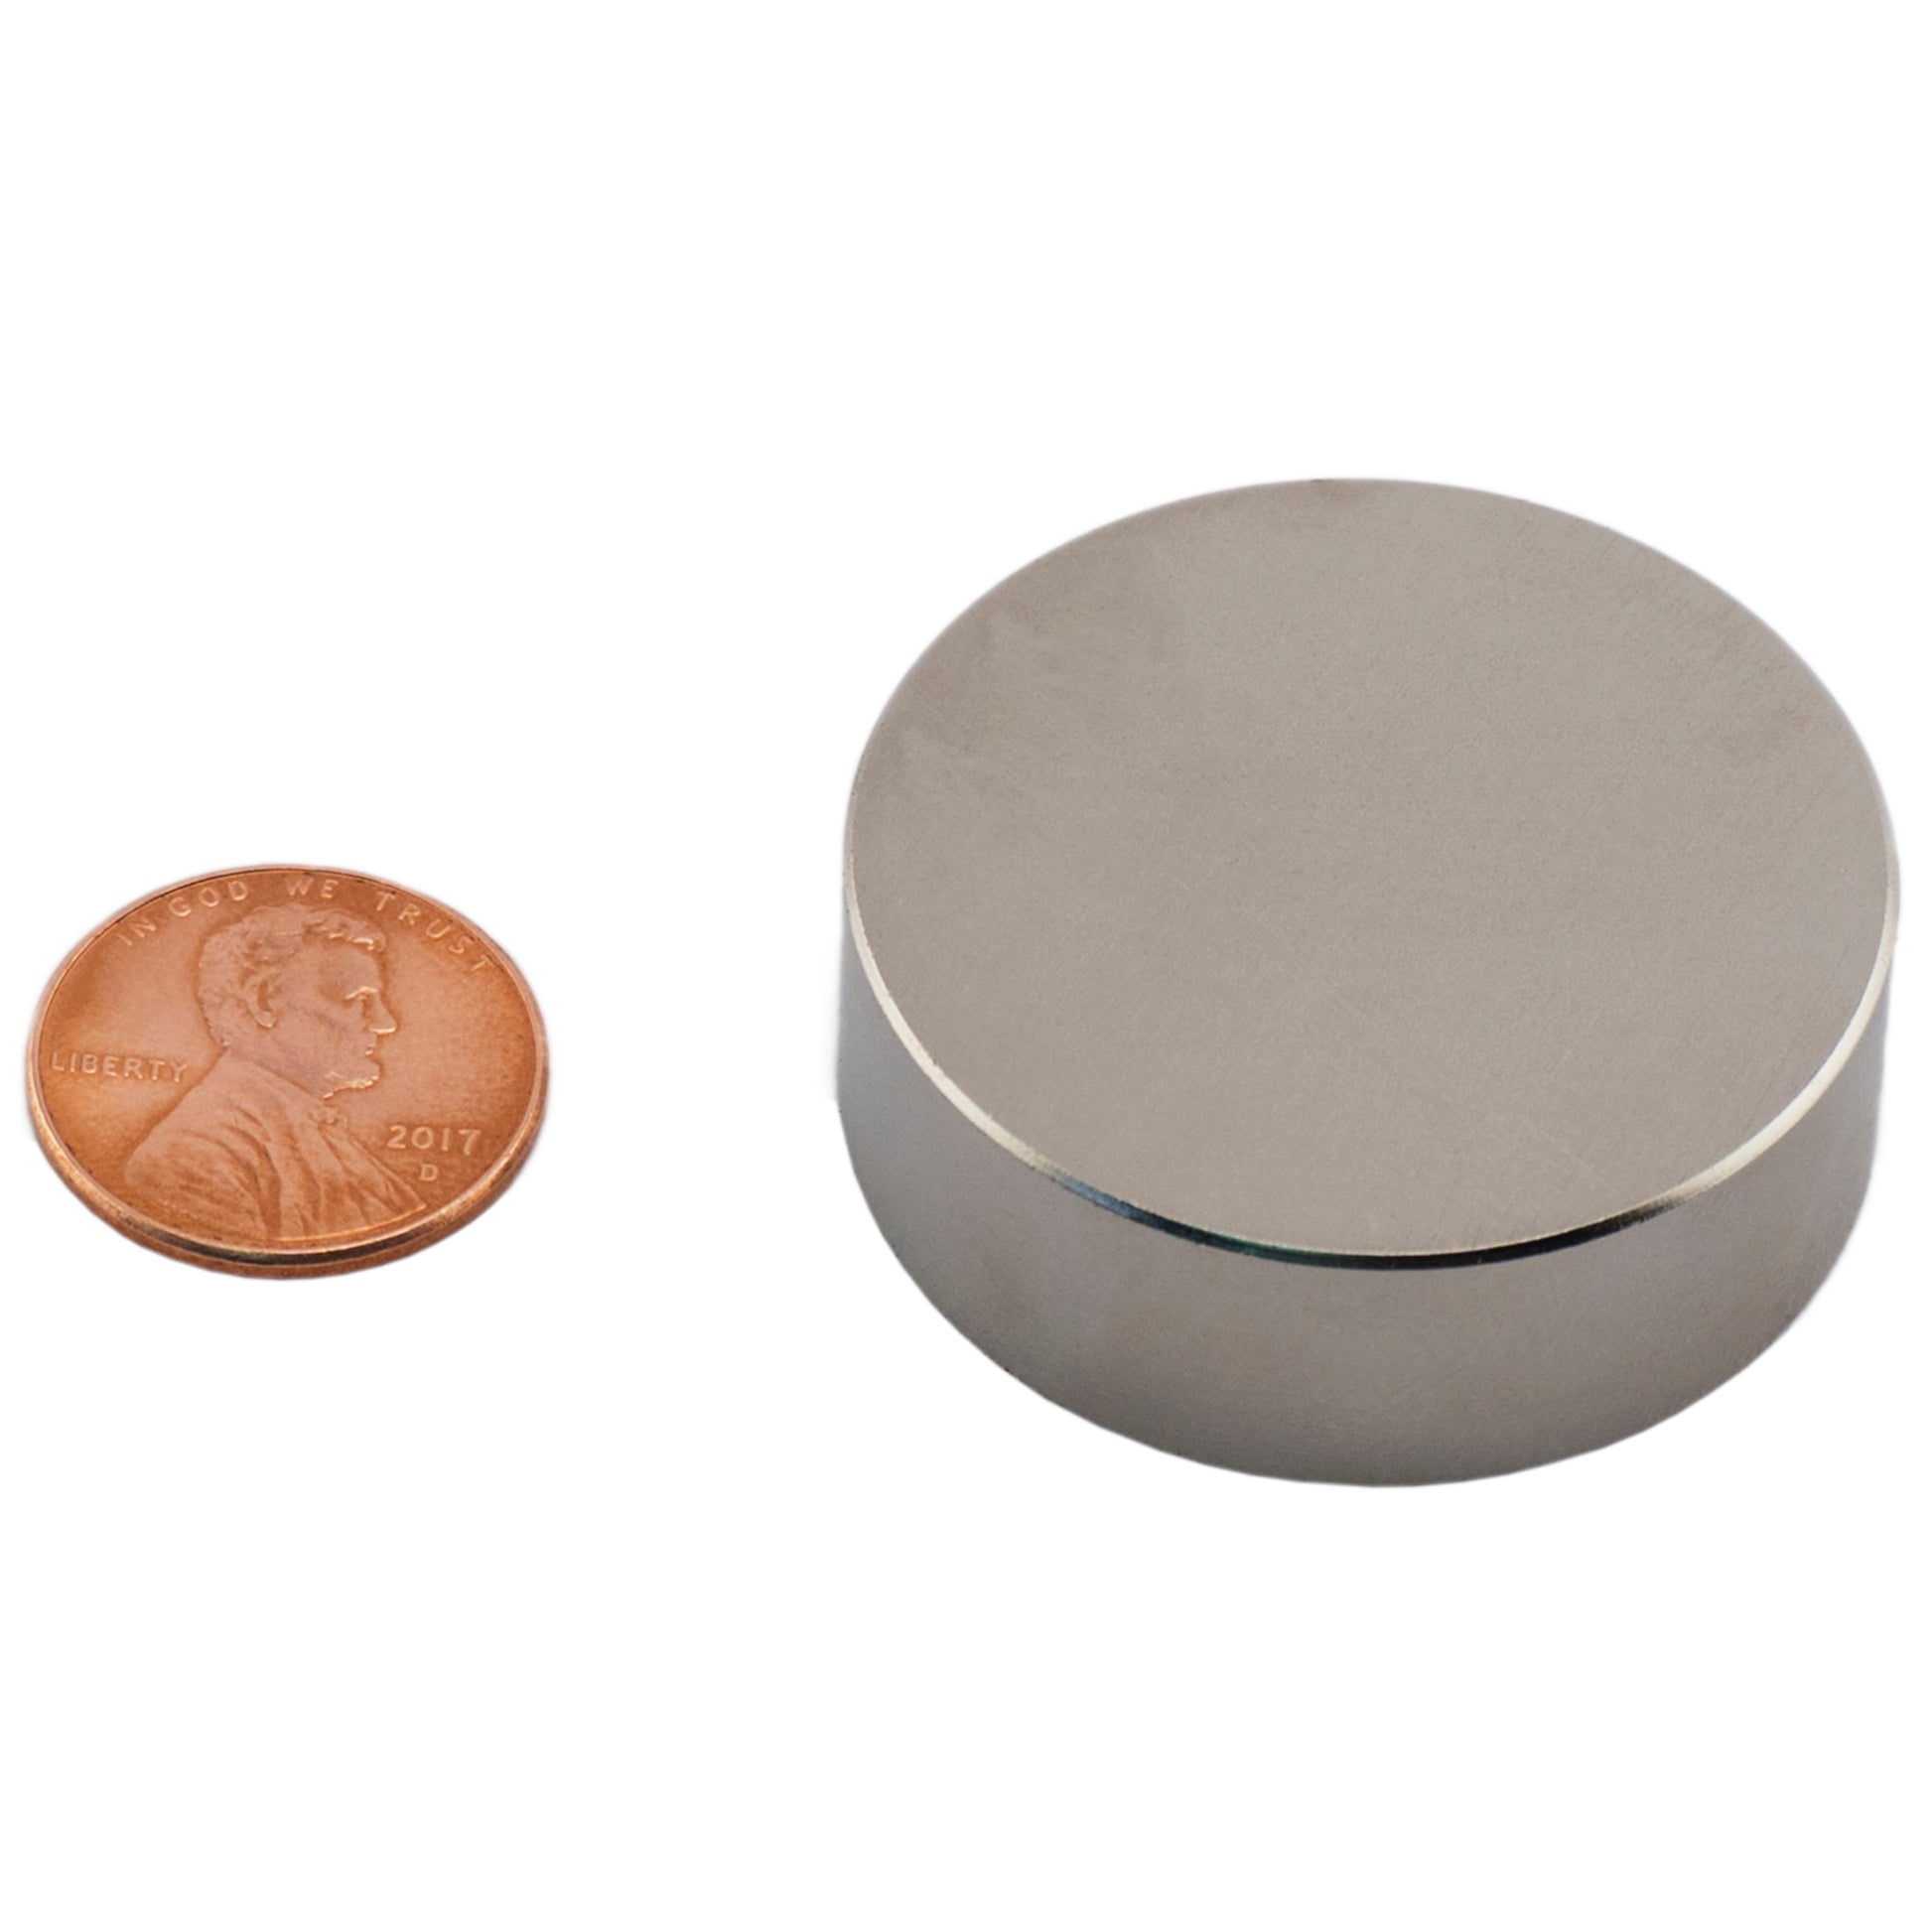 Load image into Gallery viewer, ND015009N Neodymium Disc Magnet - Compared to Penny for Size Reference